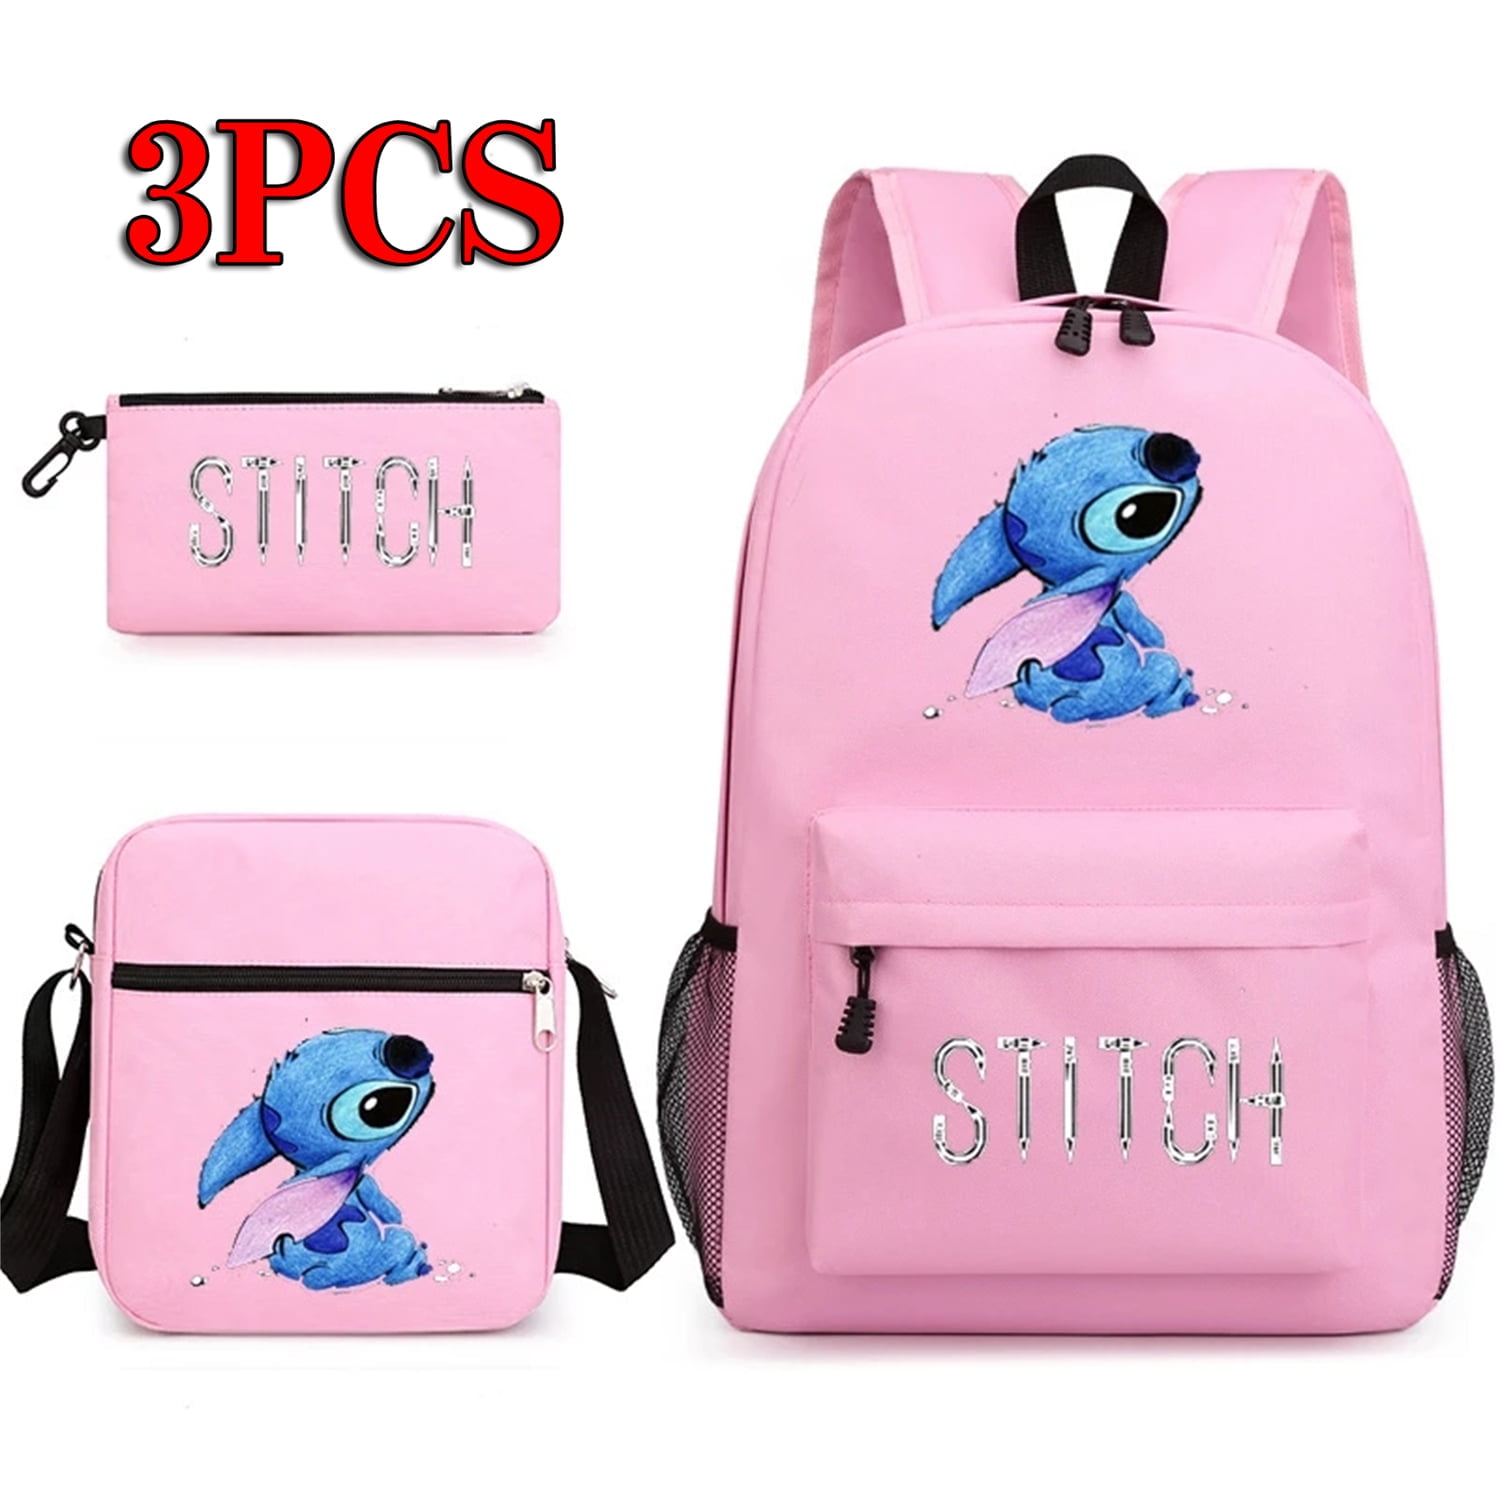 Lilo And Stitch Girls School Bags Backpack Schoolbag Large School